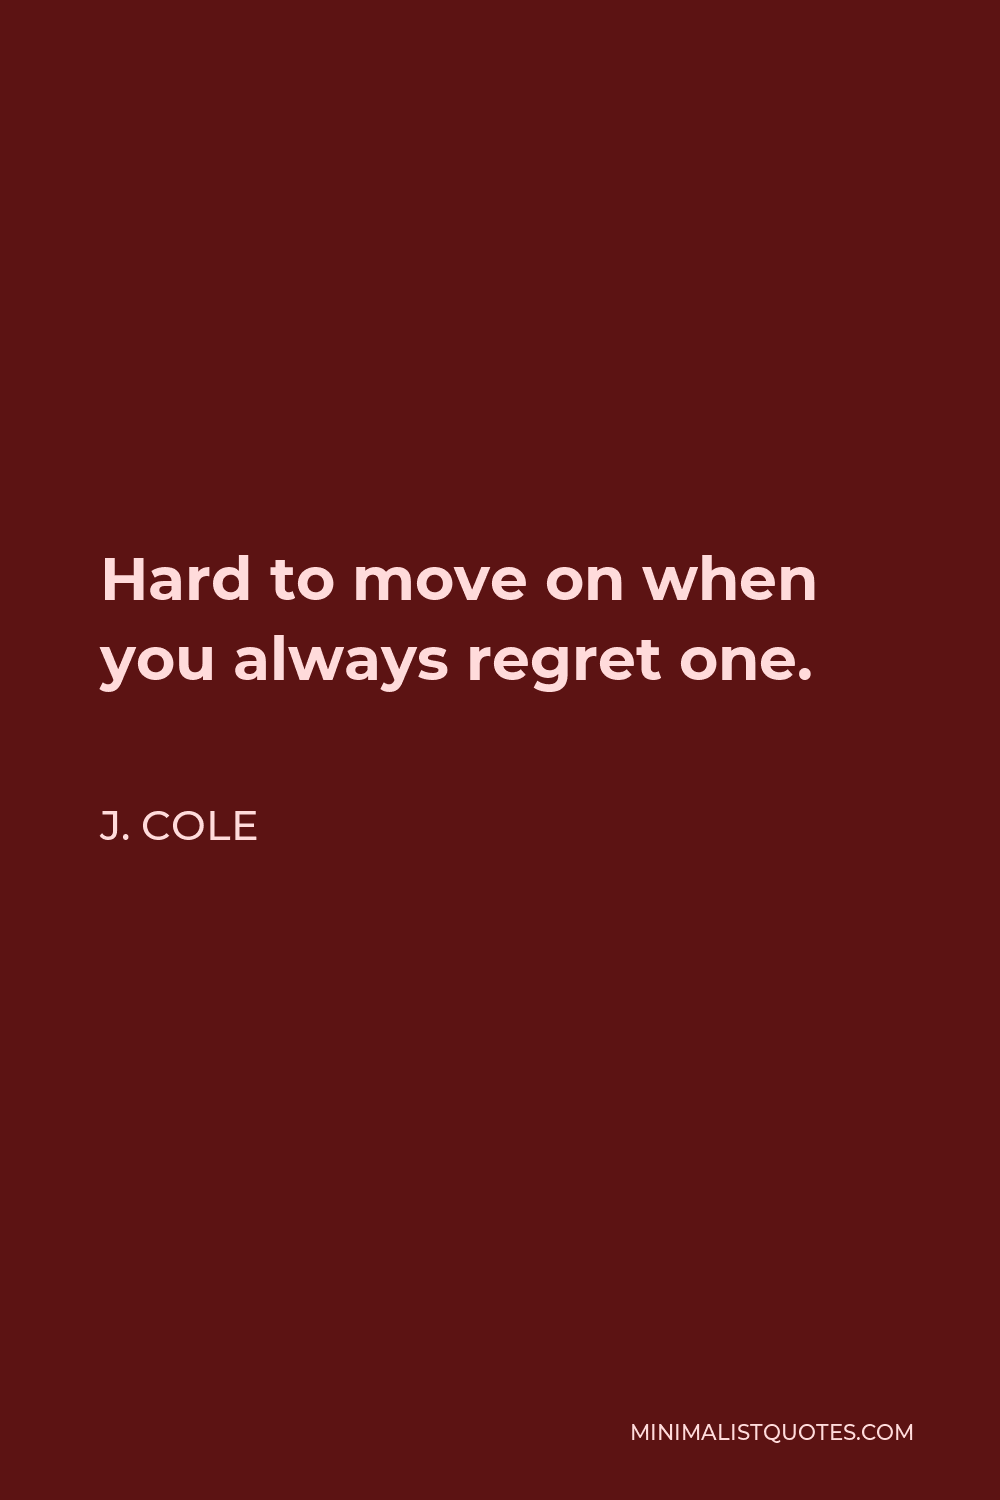 J. Cole Quote - Hard to move on when you always regret one.